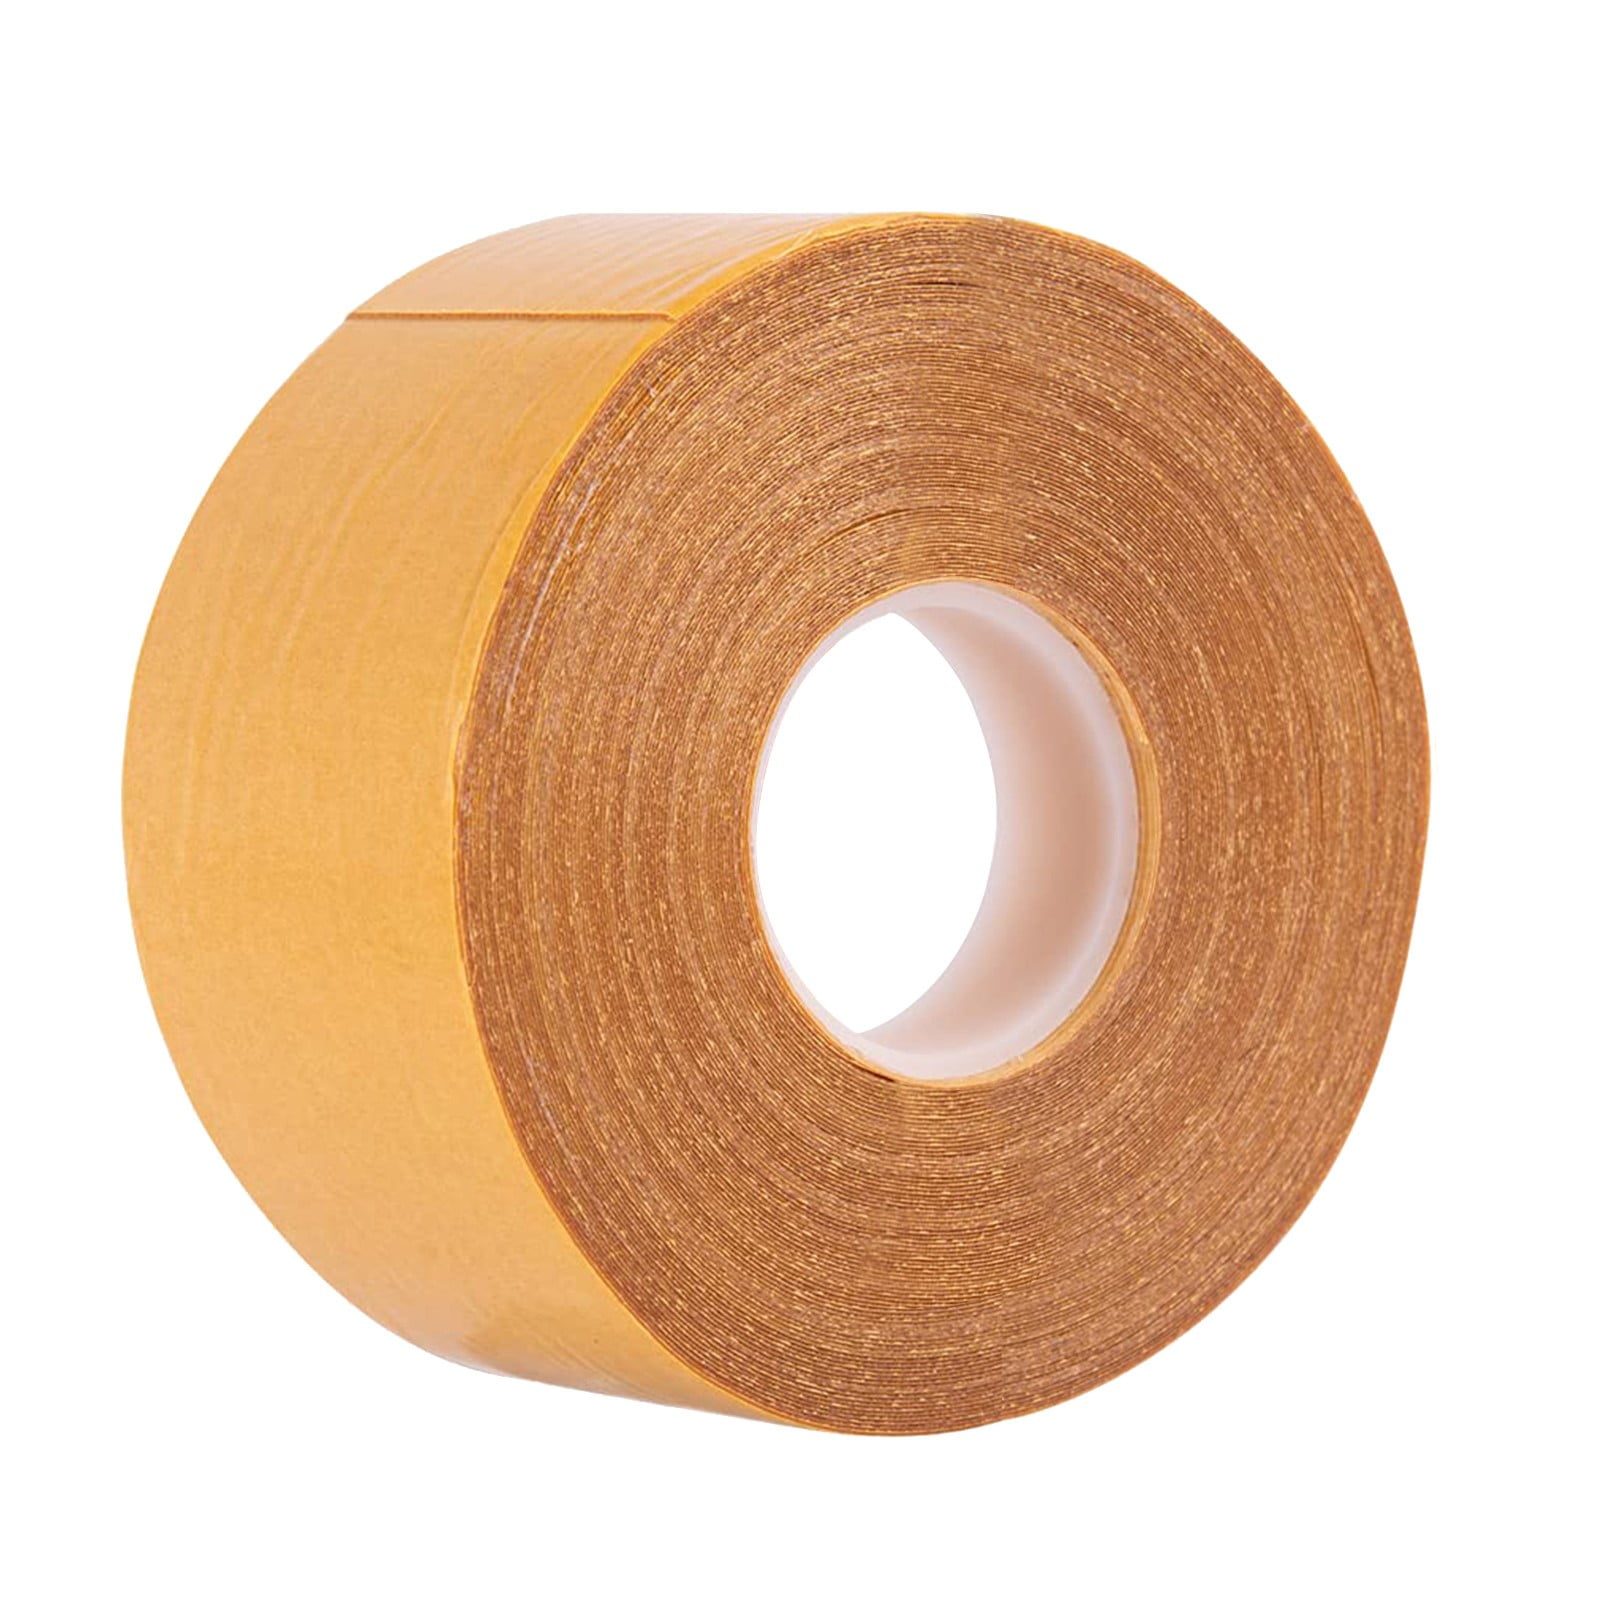 Sunhillsgrace Strong Double Sided Tape Heavy Duty Double Sided